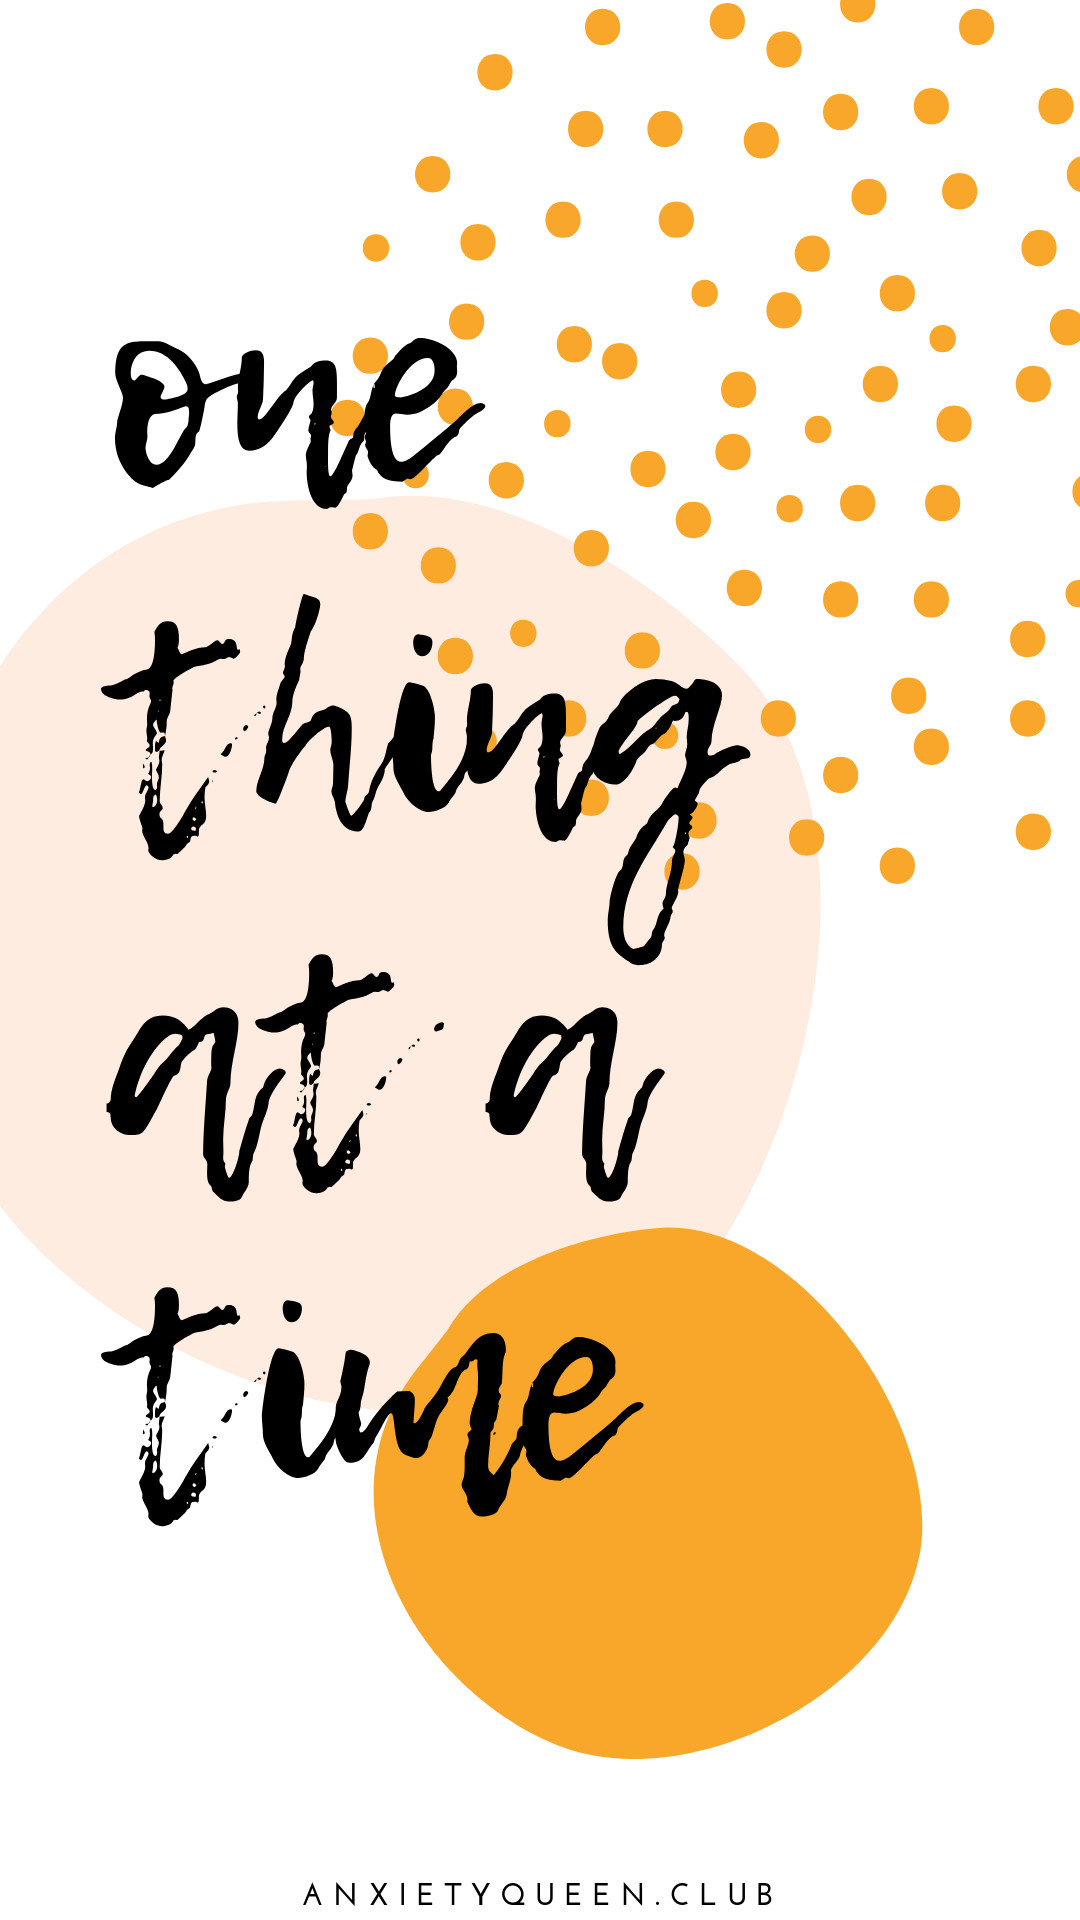 1080x1920 autumn inspired motivational quote personal growth anxiety queen club